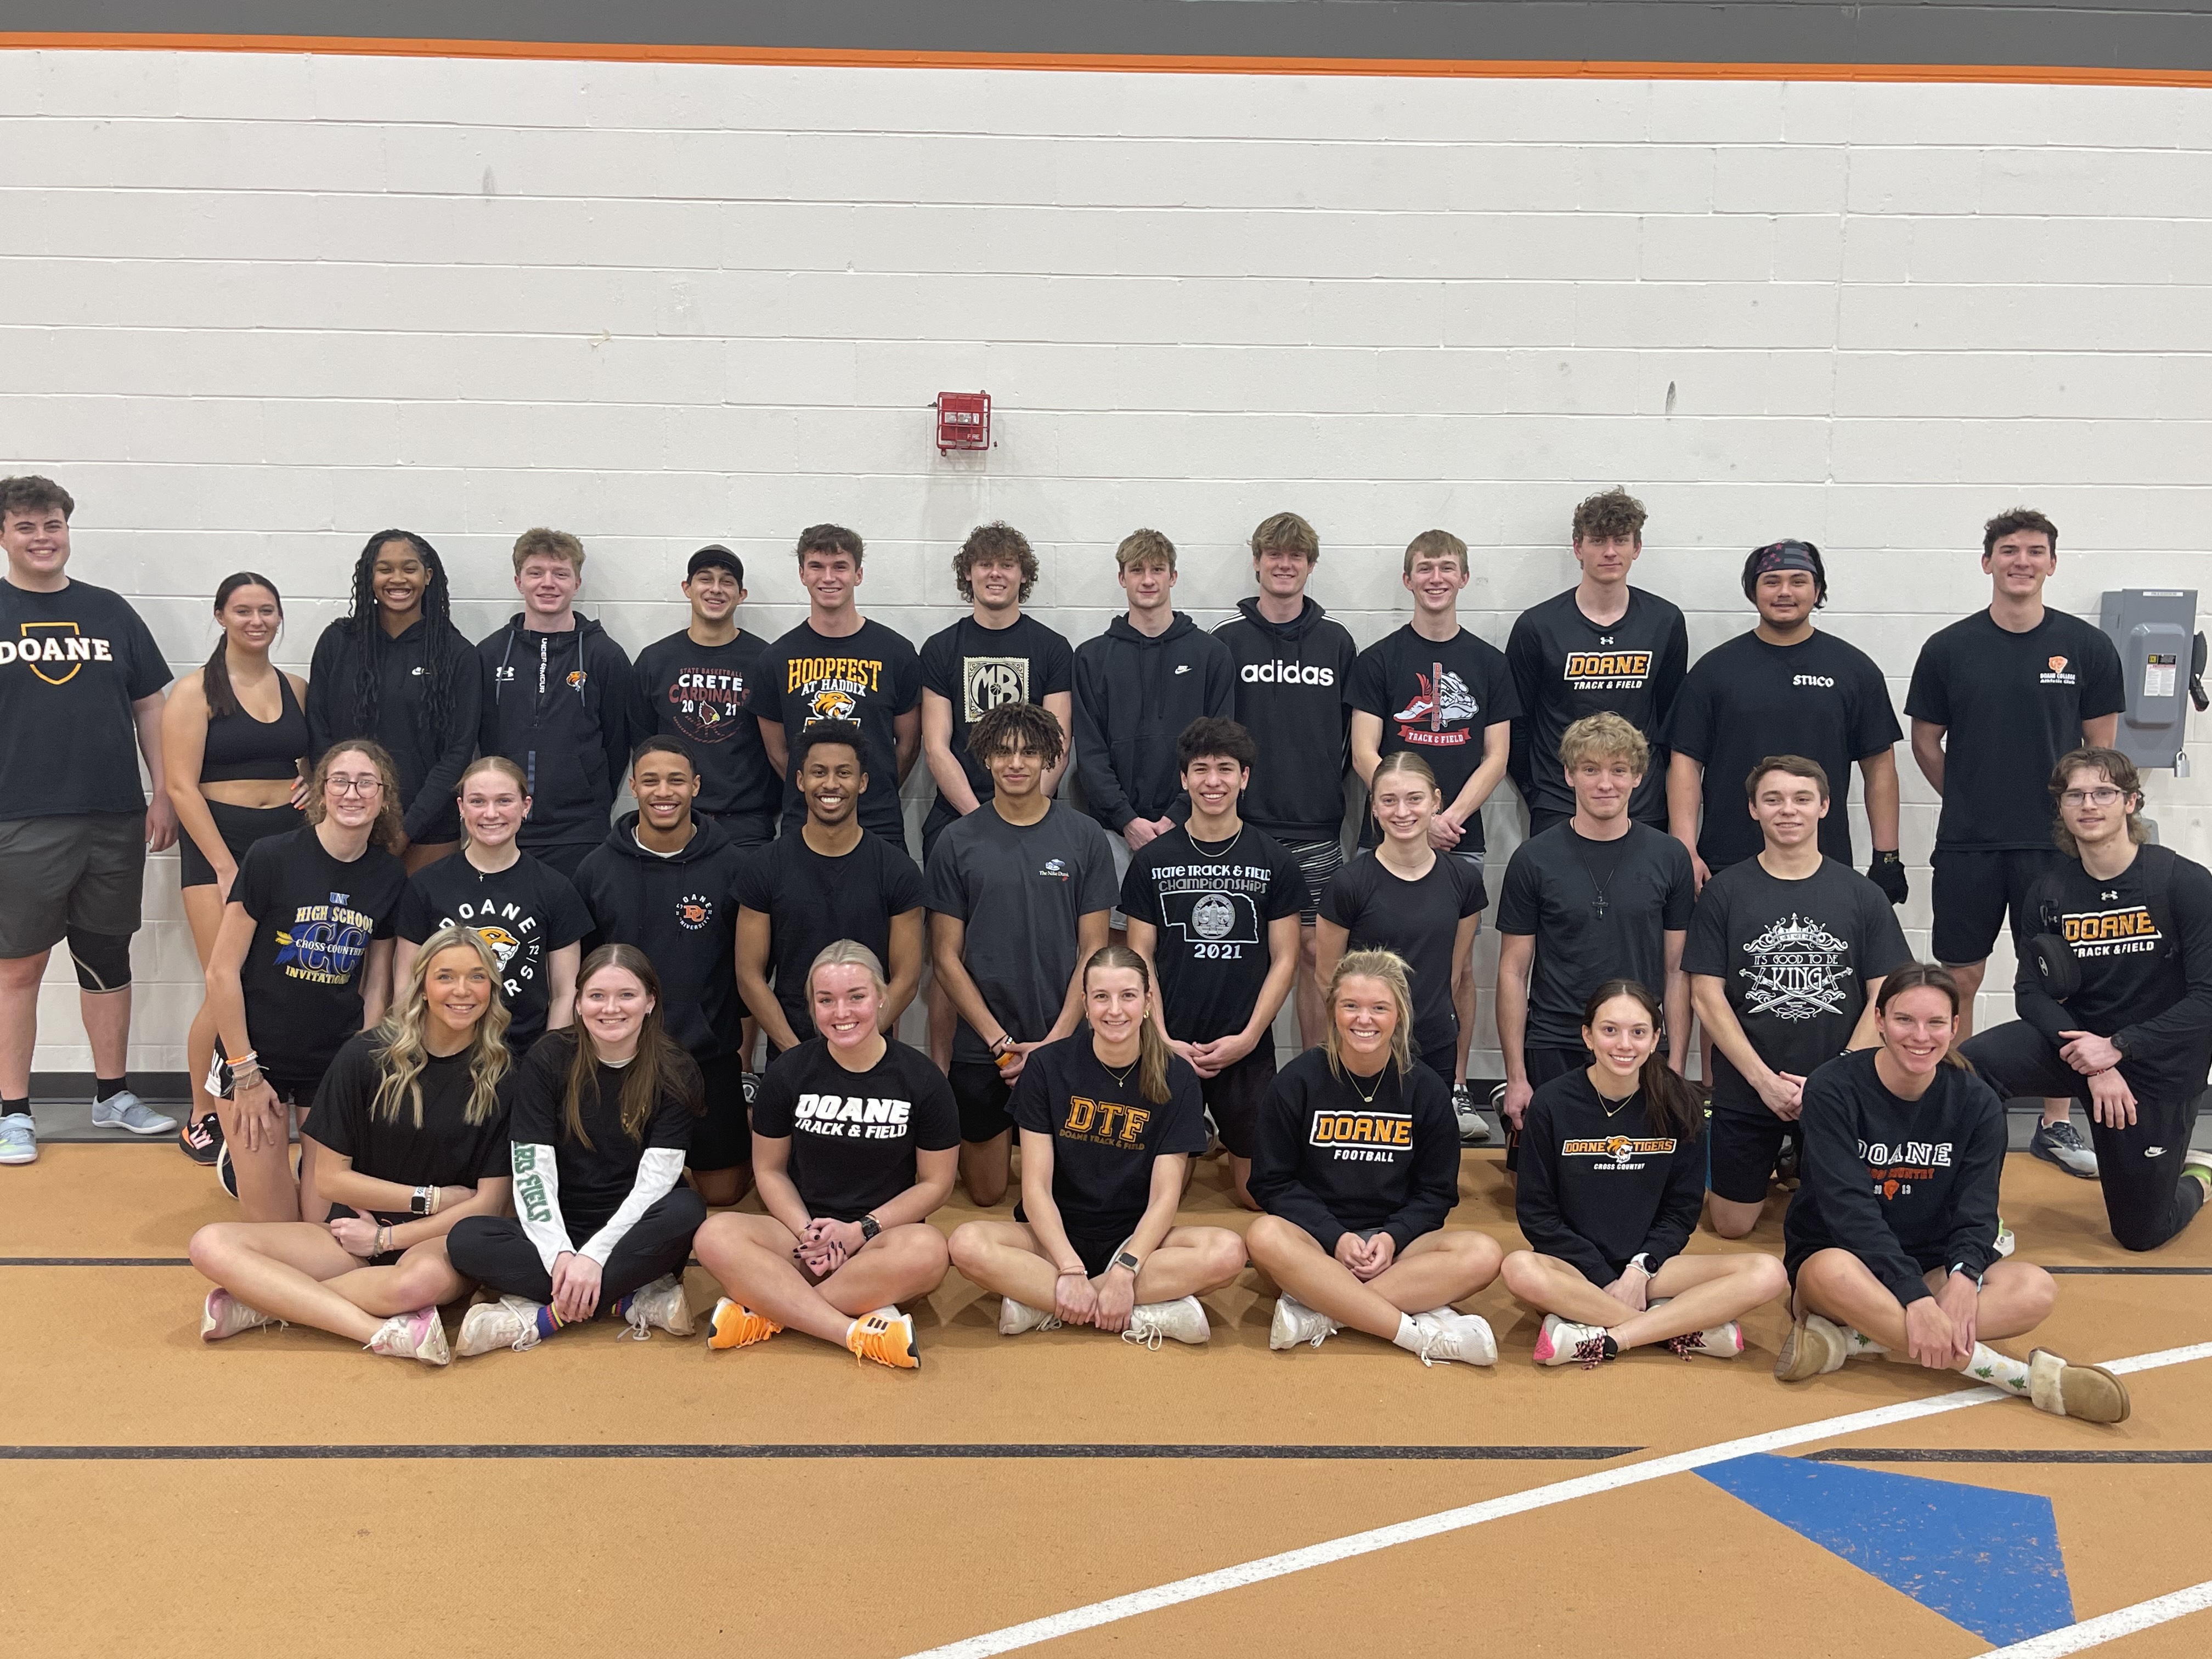 An image of 30 members of the Doane Track & Field team standing or seated in three rows on the track inside of Furhrer Fieldhouse. All 30 students are dressed in black pants and tops.